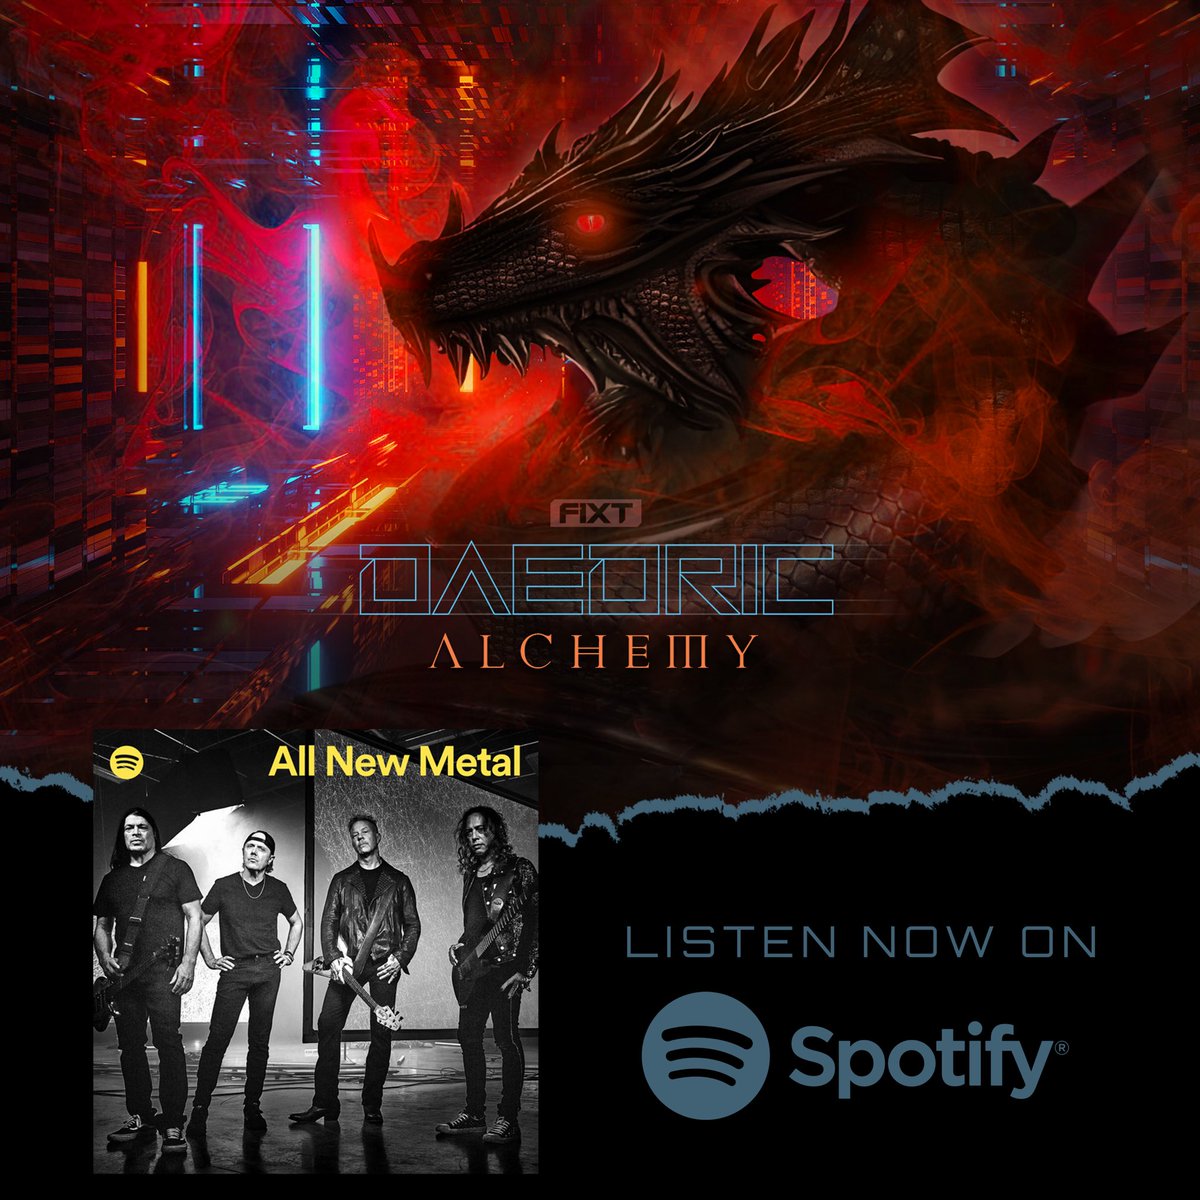 What do y'all think of the new @daedricofficial track? @spotify thinks it's worthy of their All New Metal Playlist and we couldn't agree more 🤘🏼